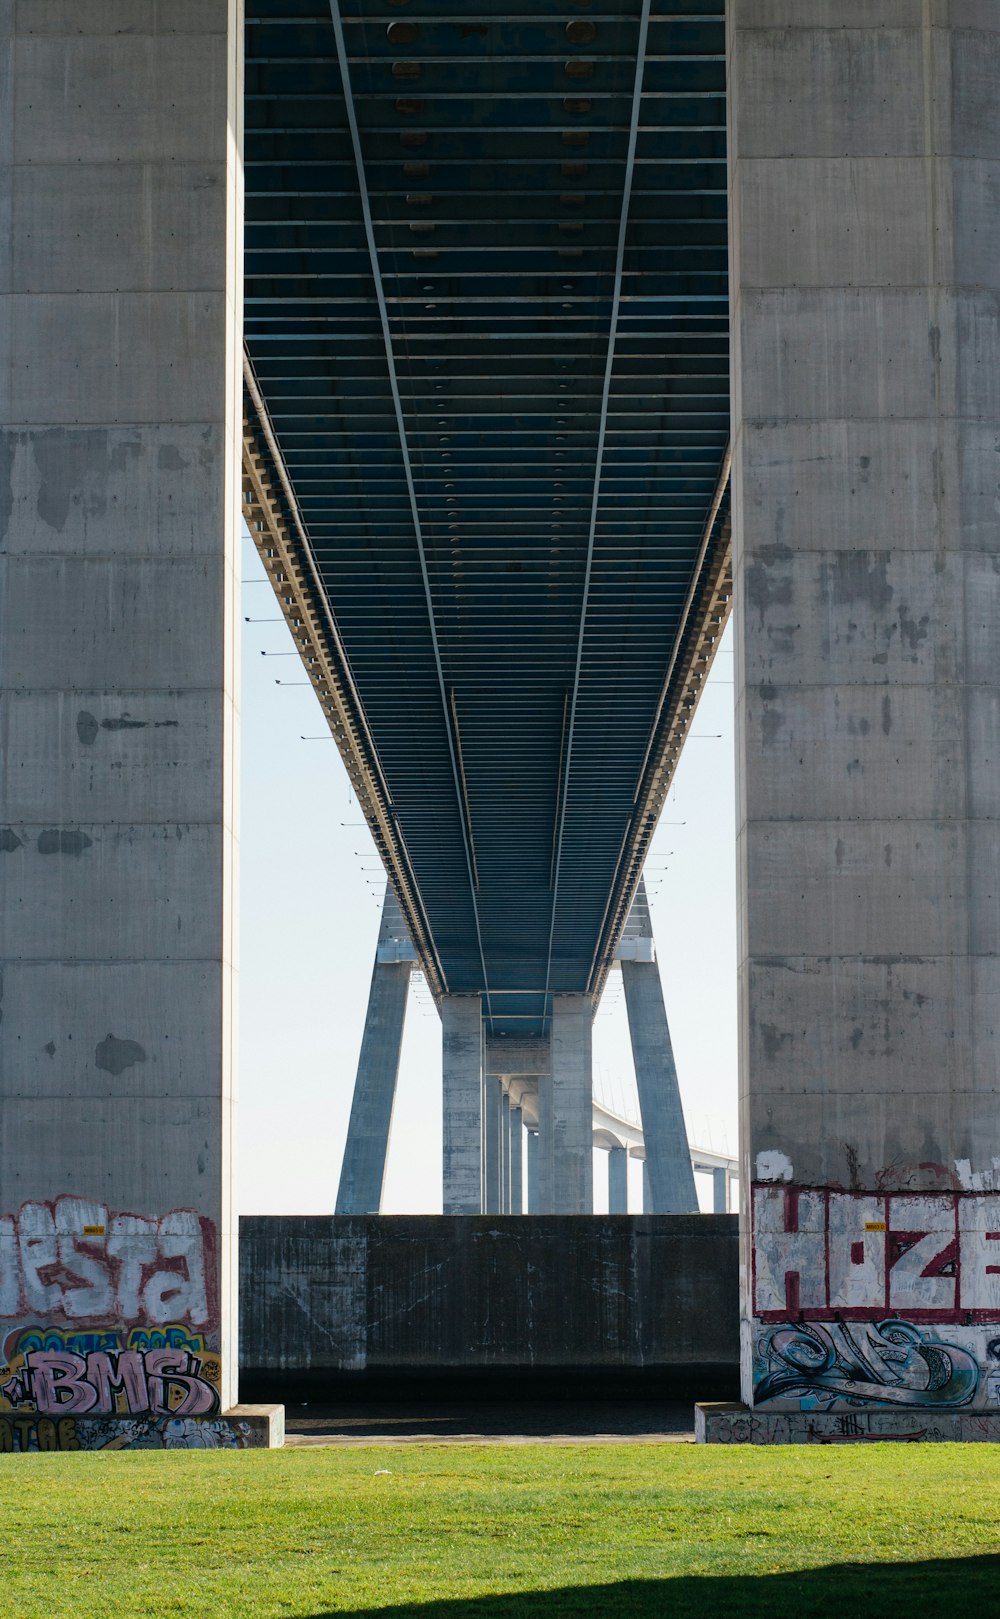 a bridge with graffiti on the side of it